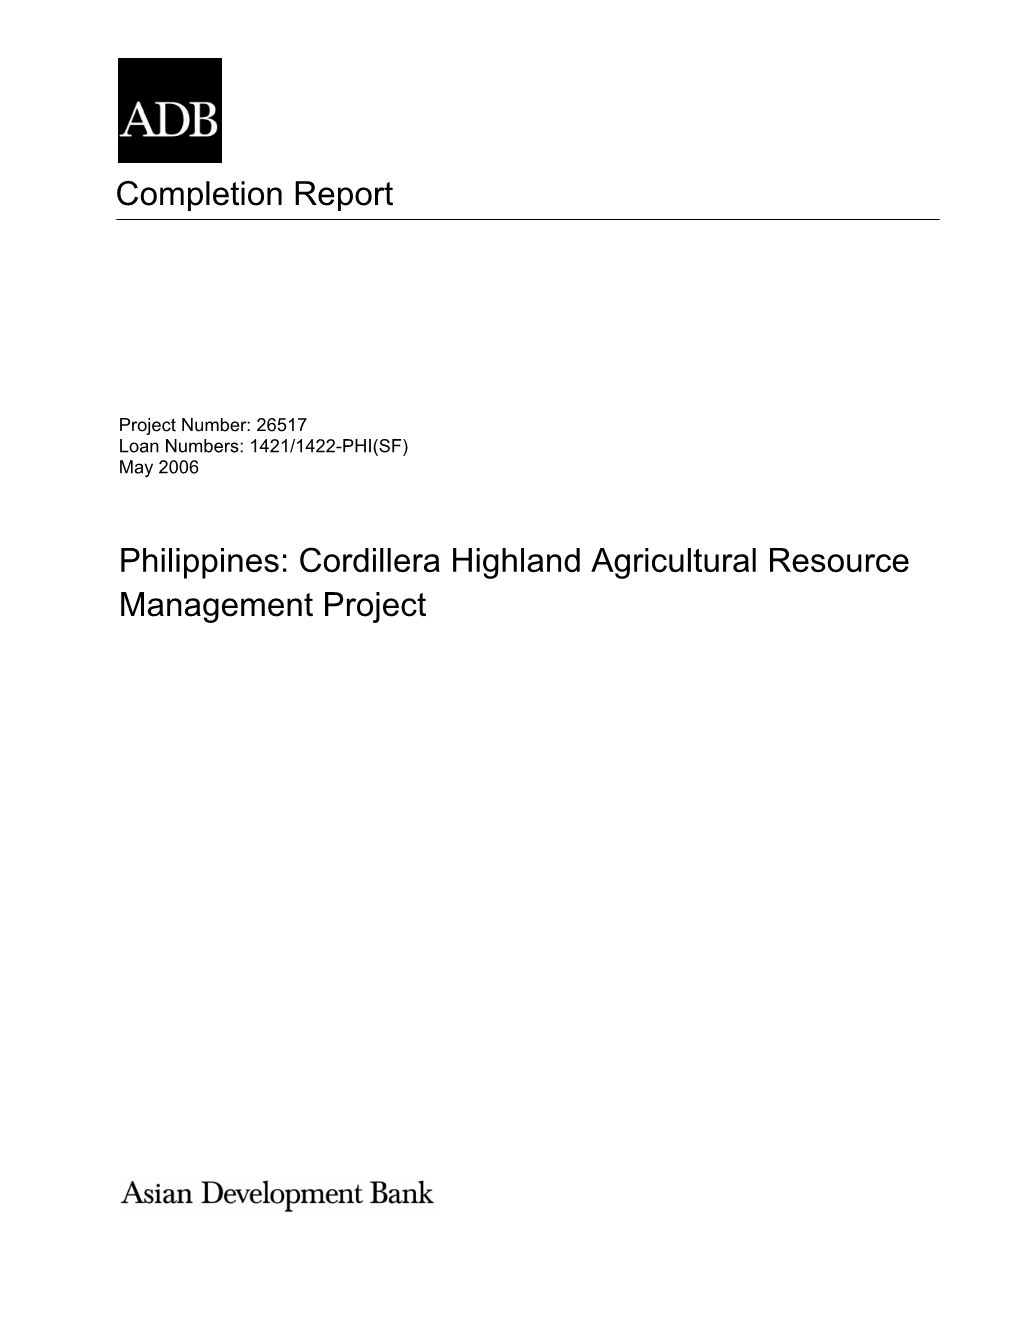 Philippines: Cordillera Highland Agricultural Resource Management Project